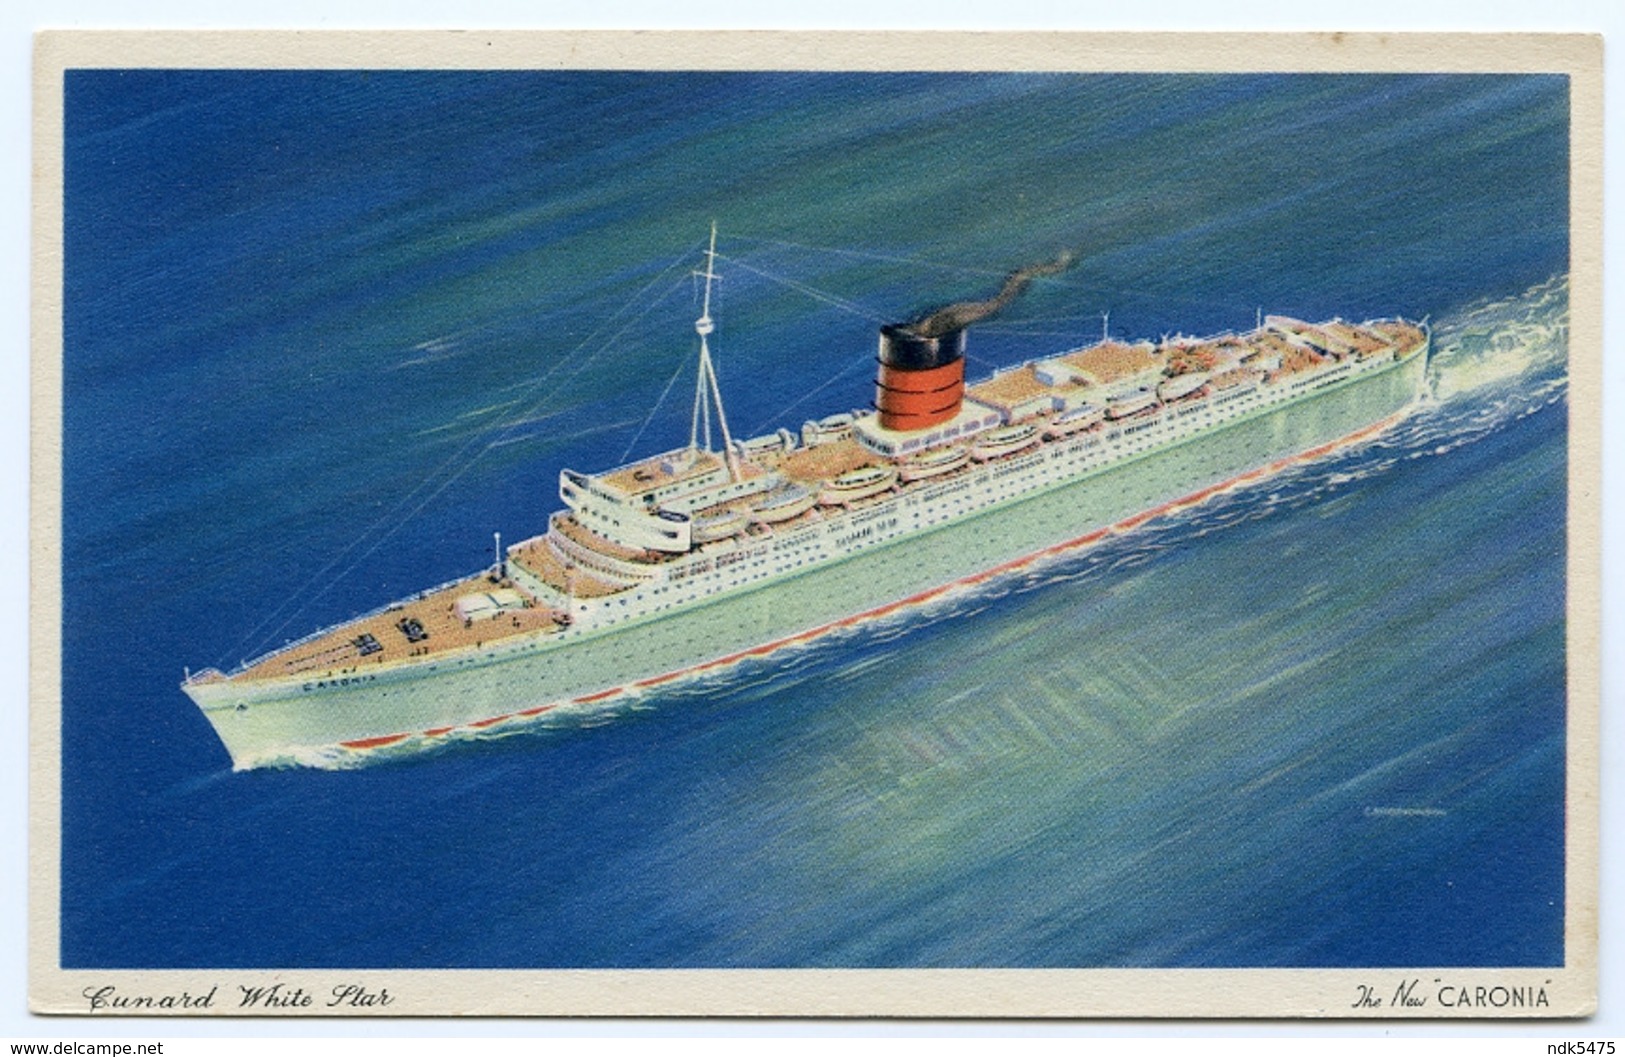 CUNARD WHITE STAR : THE NEW CARONIA - GREEN HULL - Steamers